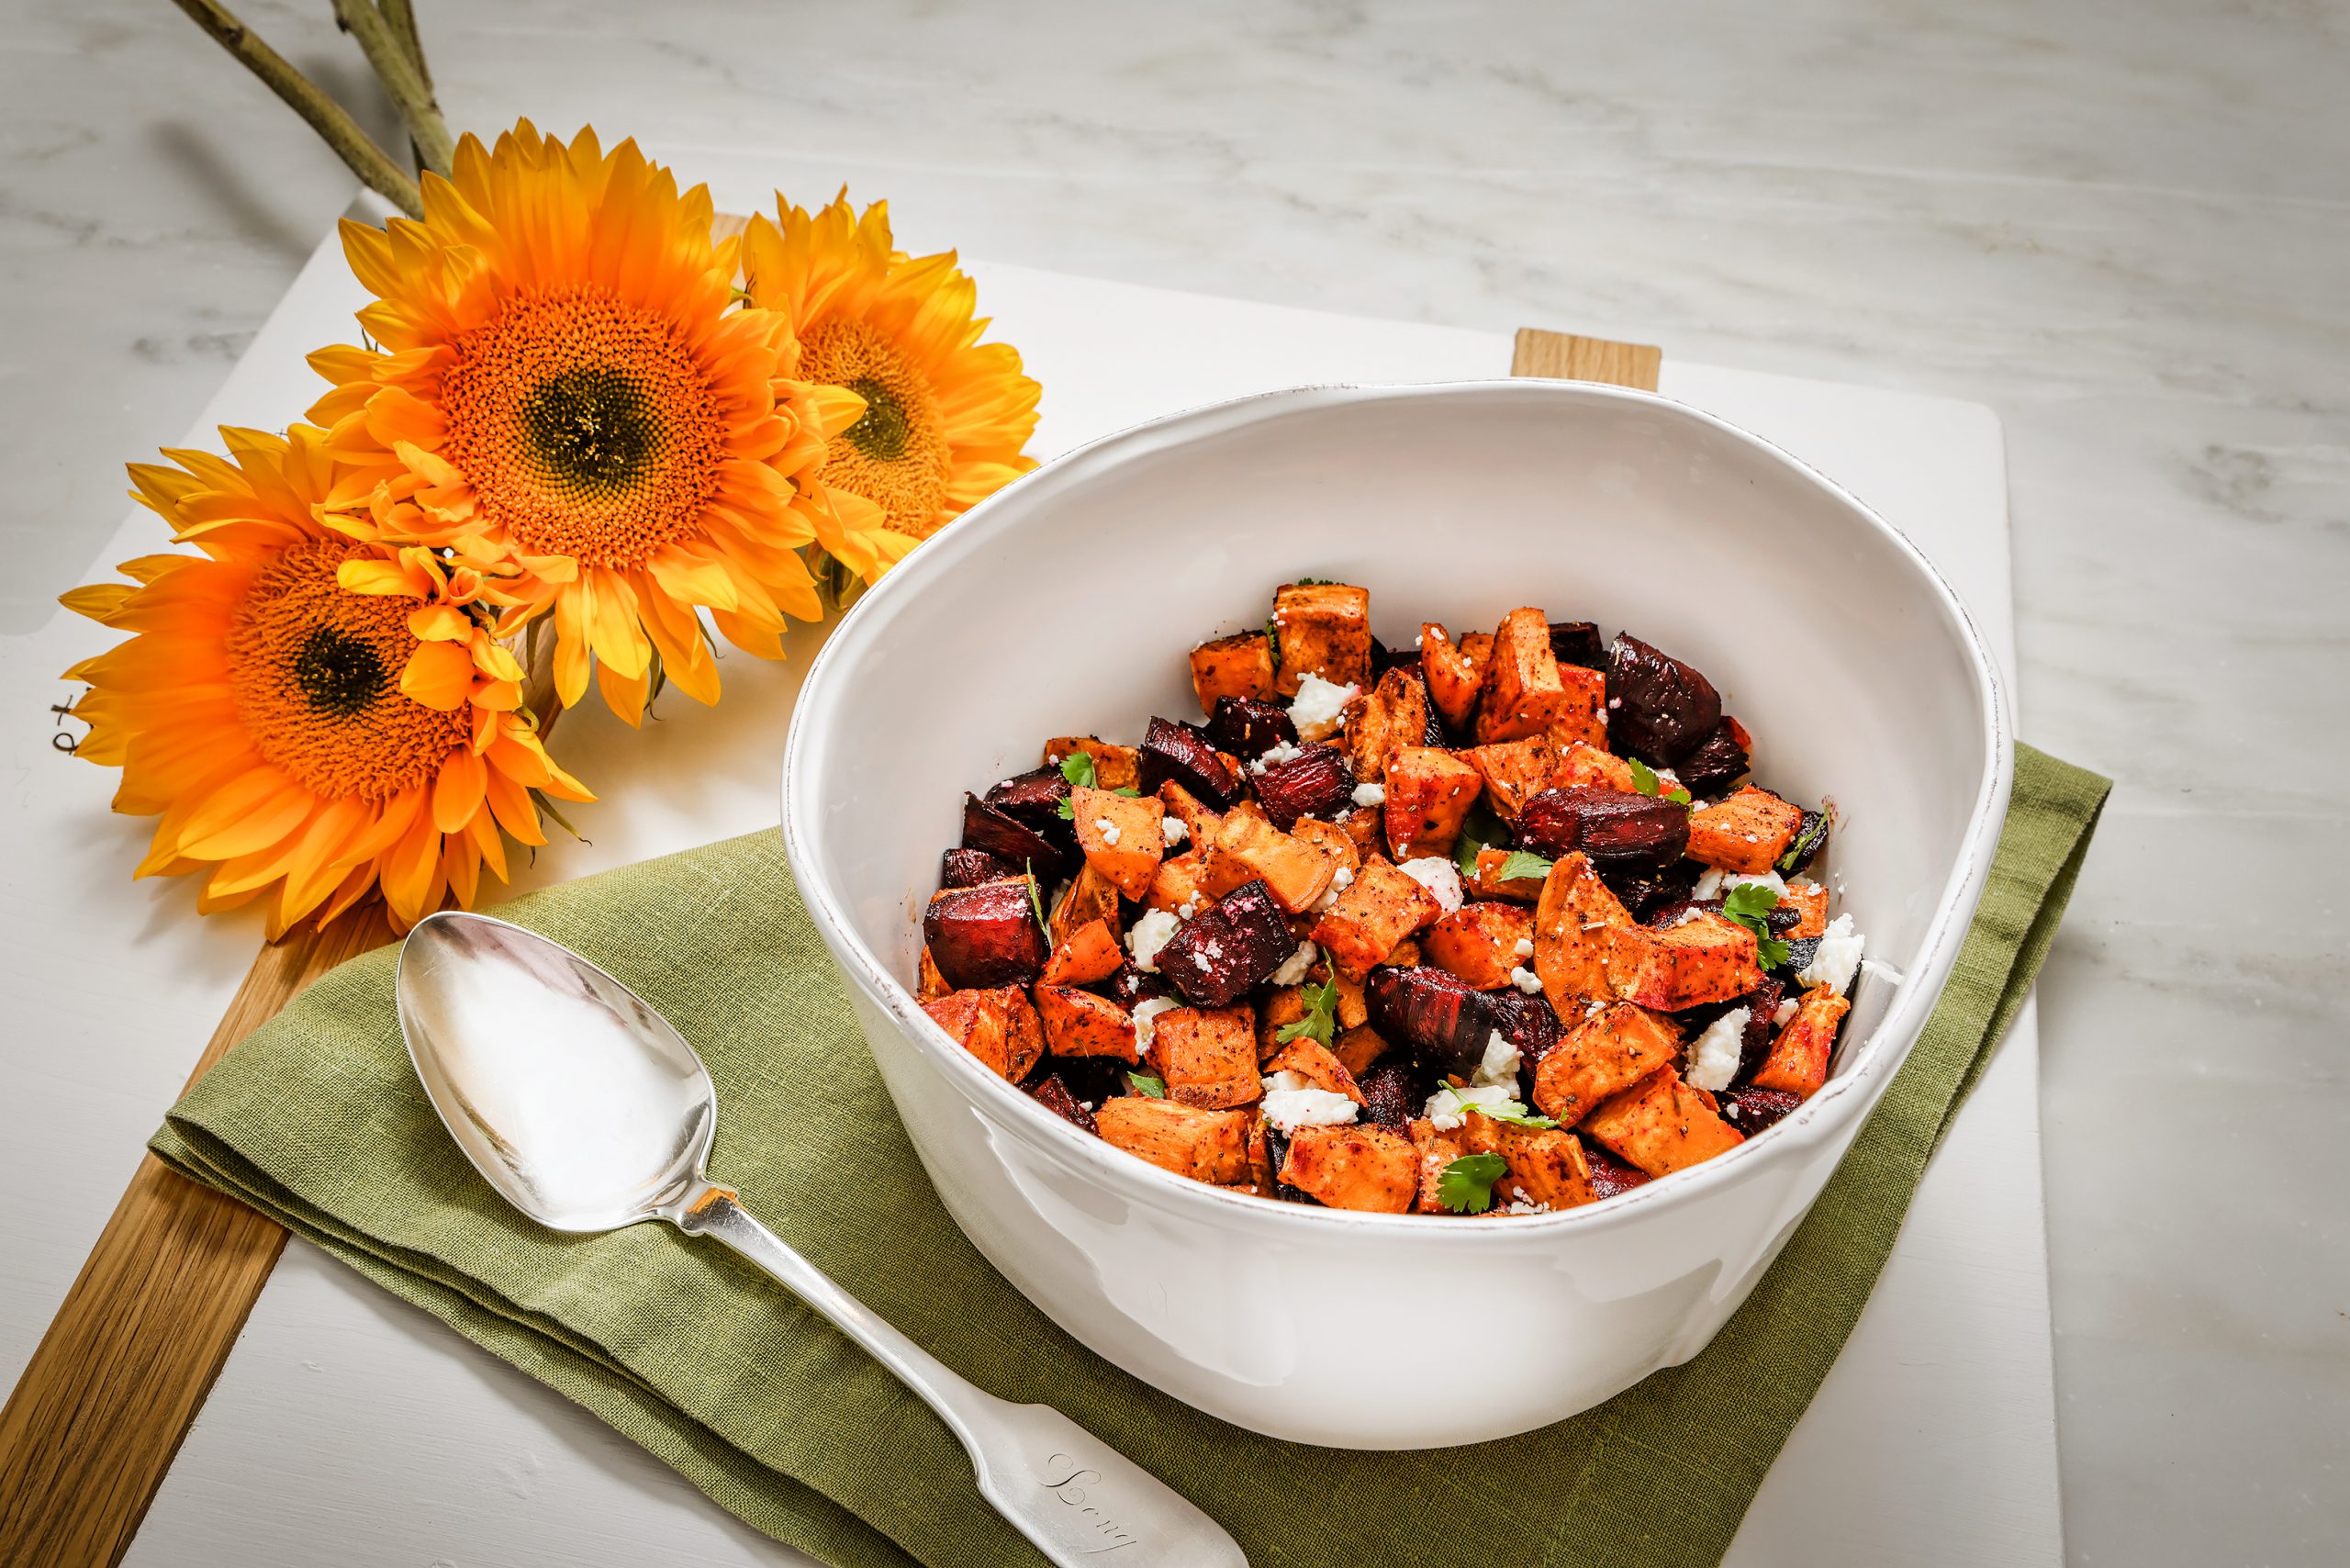 Freshly roasted beets and sweet potatoes are a perfect accompaniment to any fall meal. Add some feta cheese and cilantro for extra flavor. Charcuterie and Serving Board by etuHOME, Lastra White Medium Serving Bowl, courtesy of The Gourmet Shop.